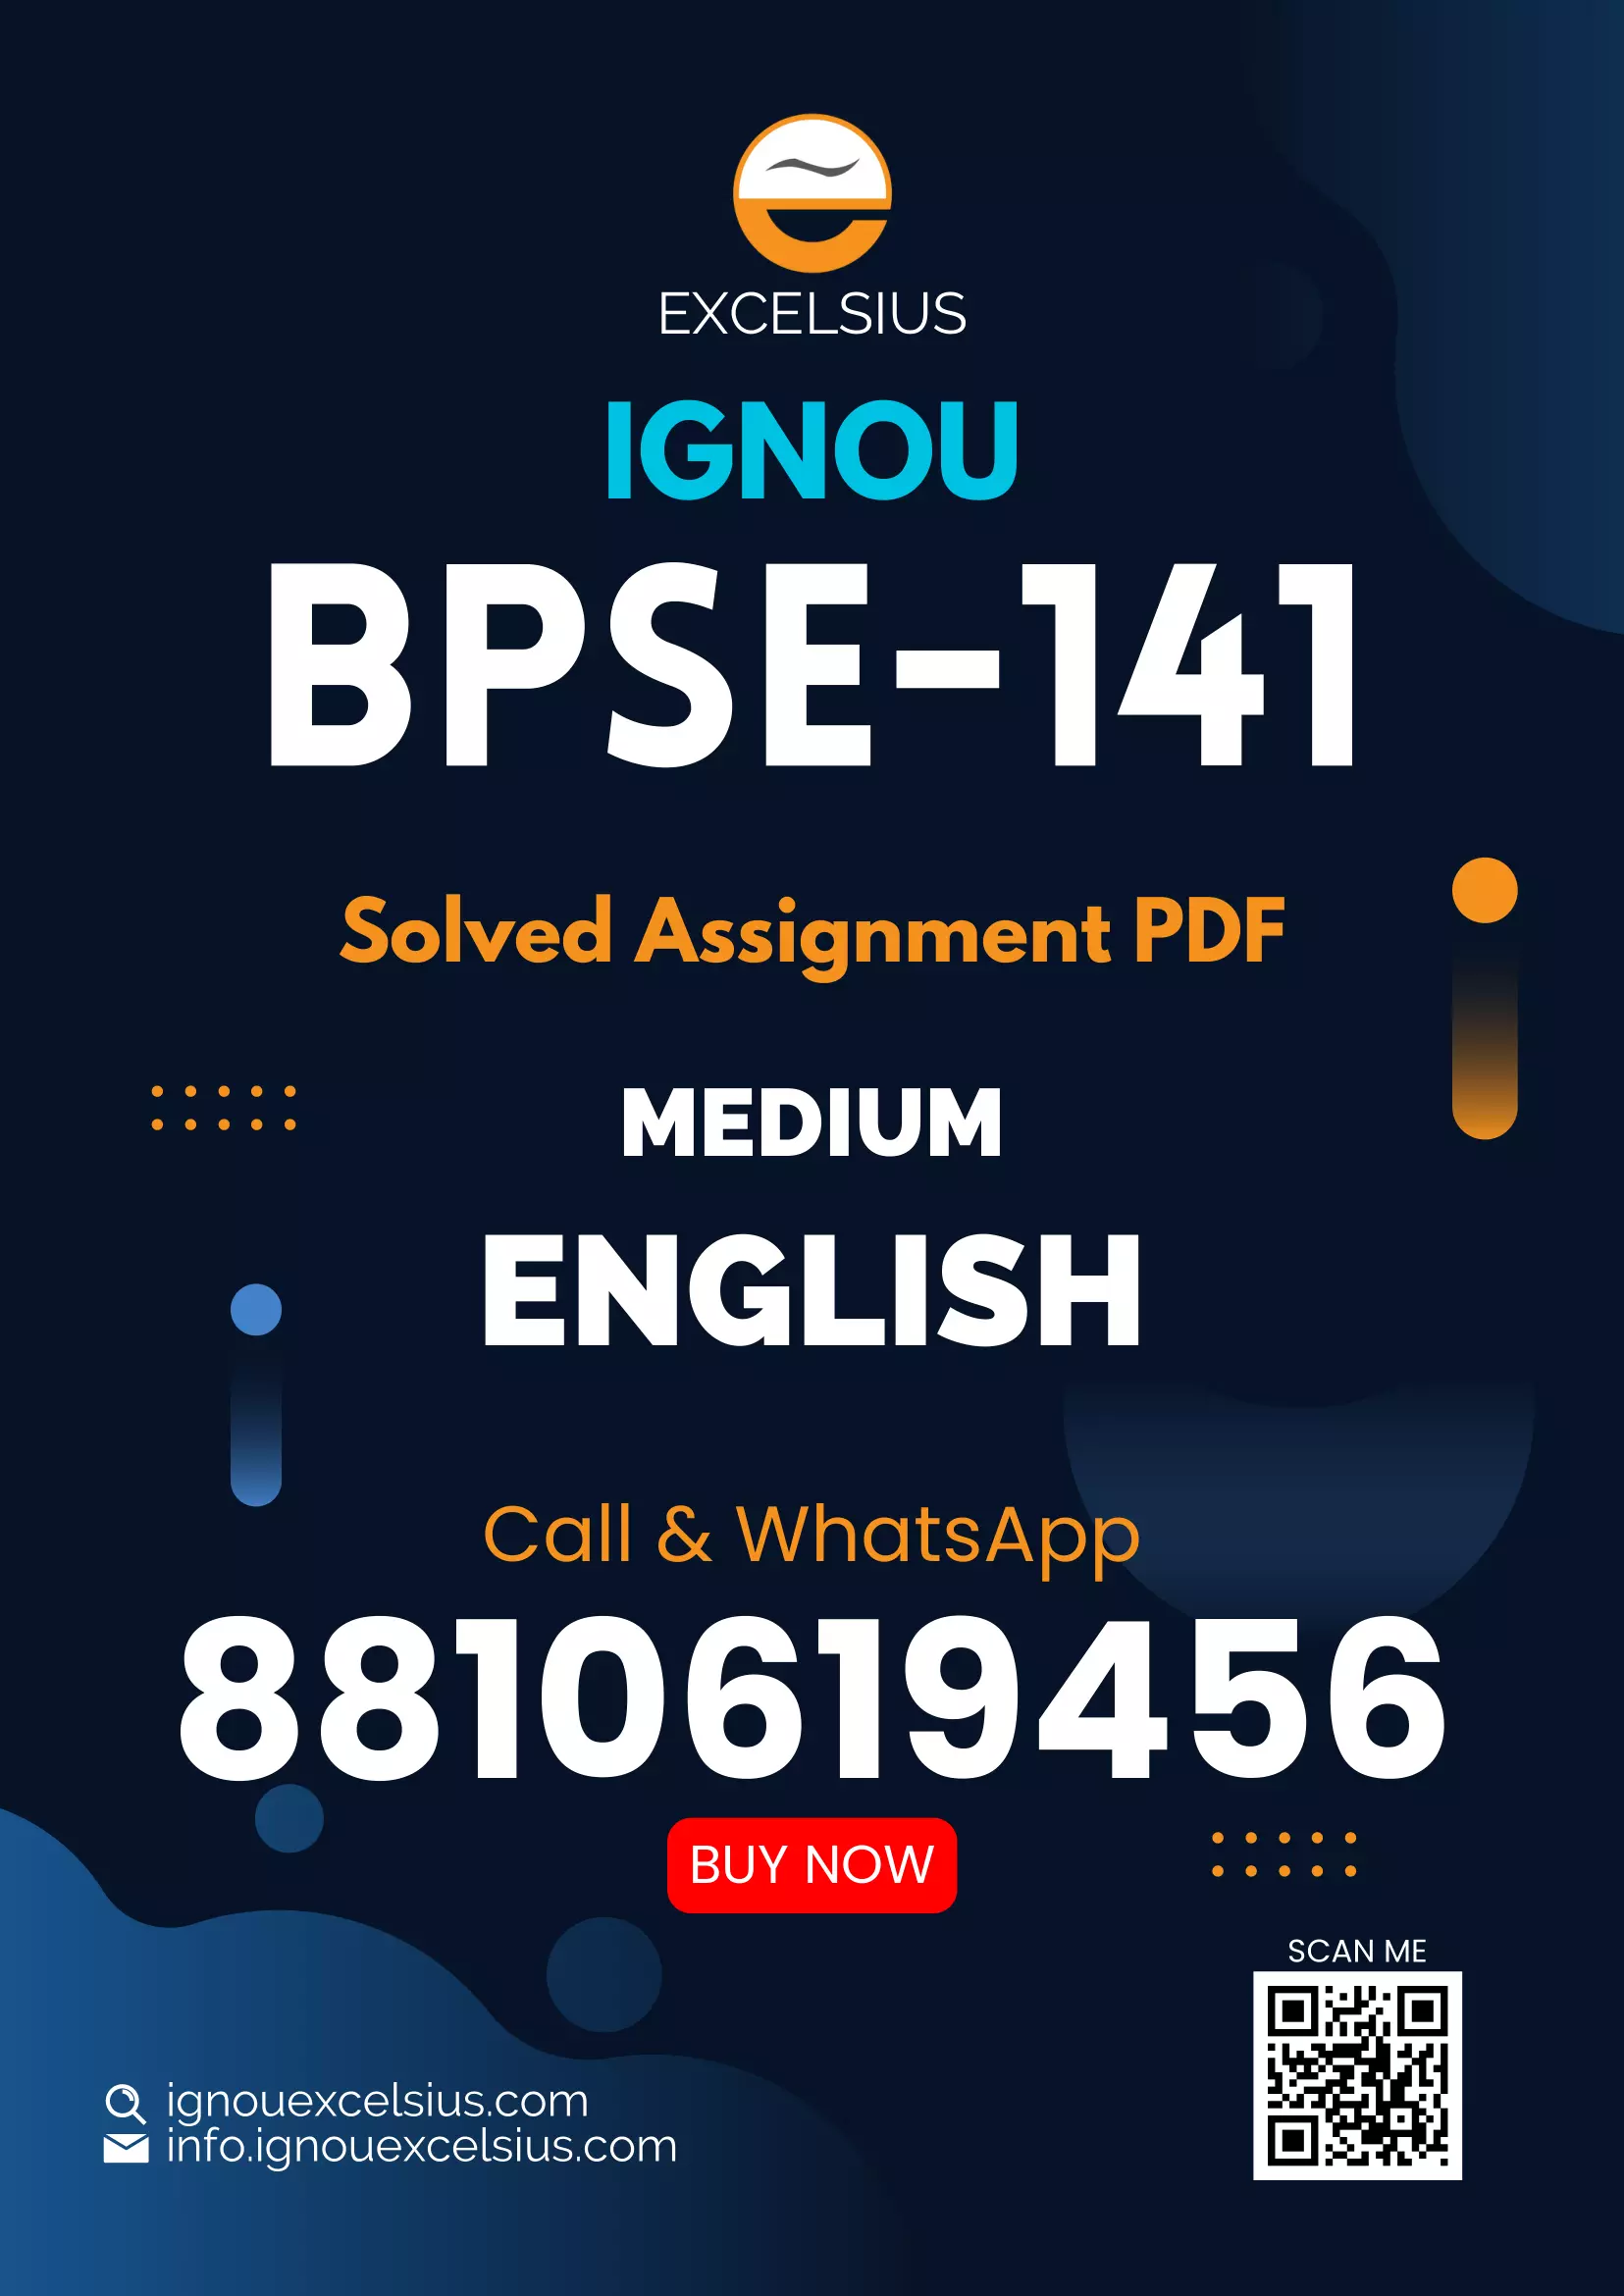 IGNOU BPSE-141 - Gandhi and the Contemporary World, Latest Solved Assignment-July 2022 – January 2023